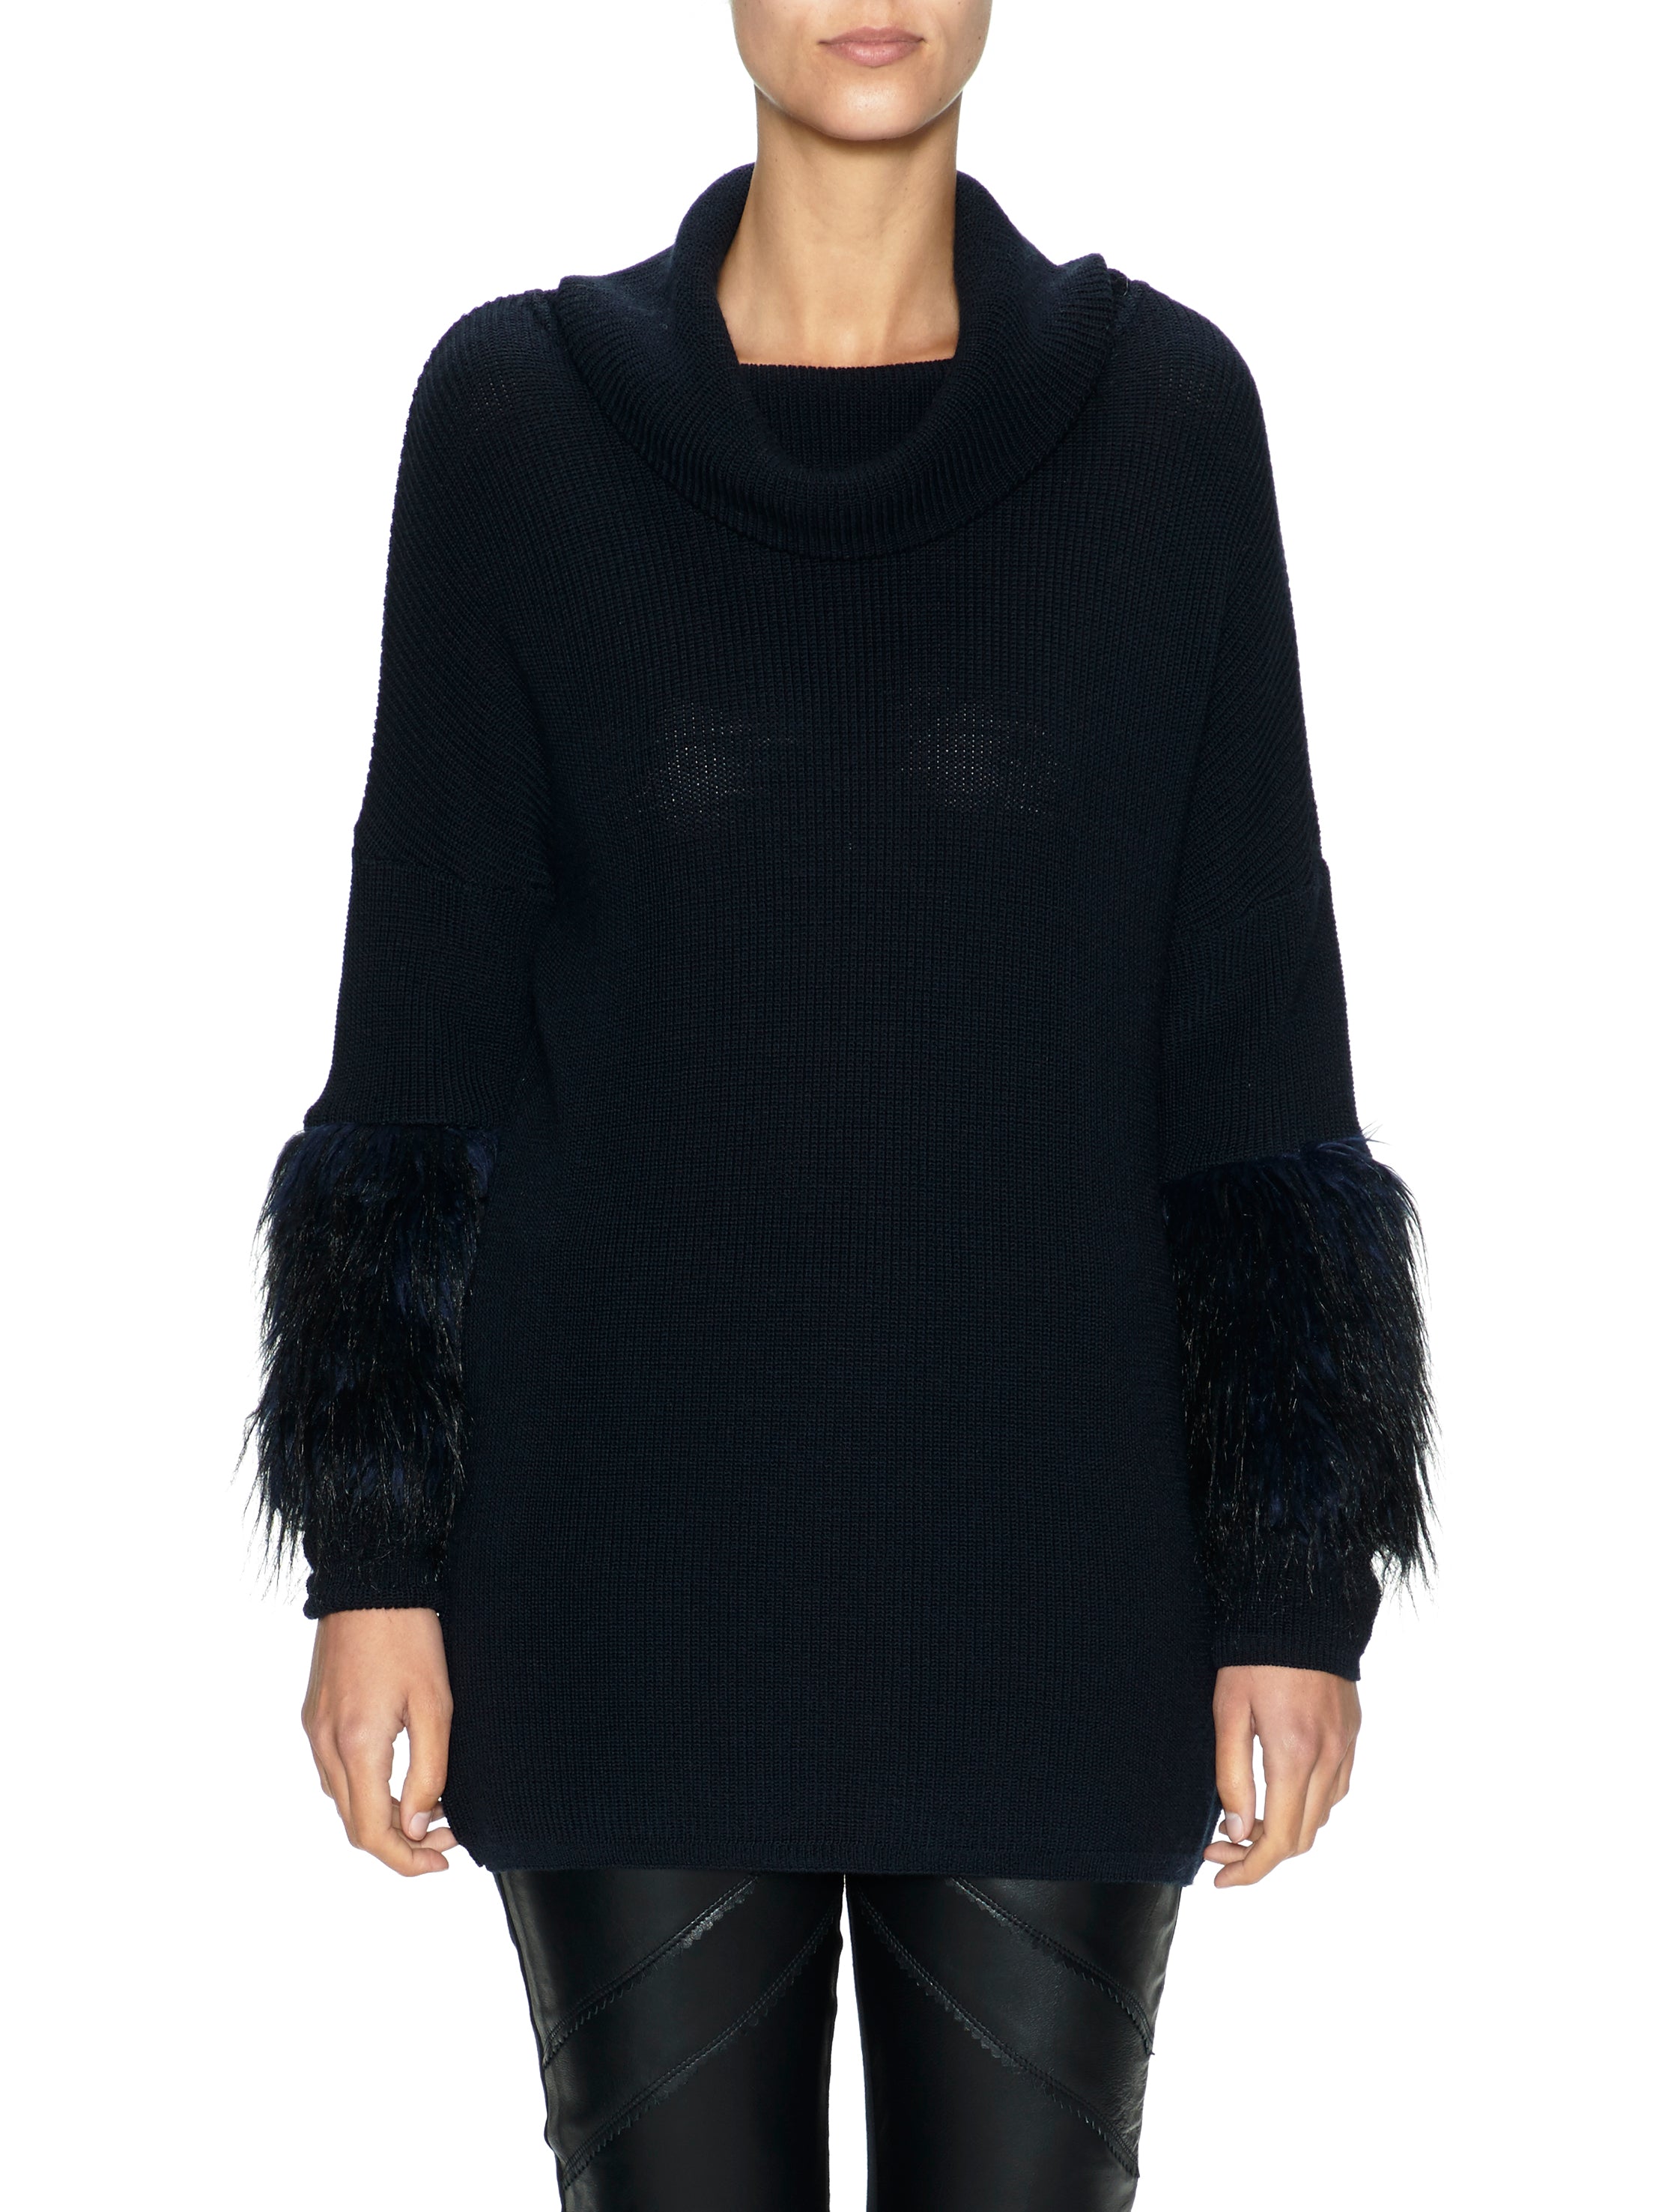 Knit Jumper with Faux Fur Sleeves (New Colourway)